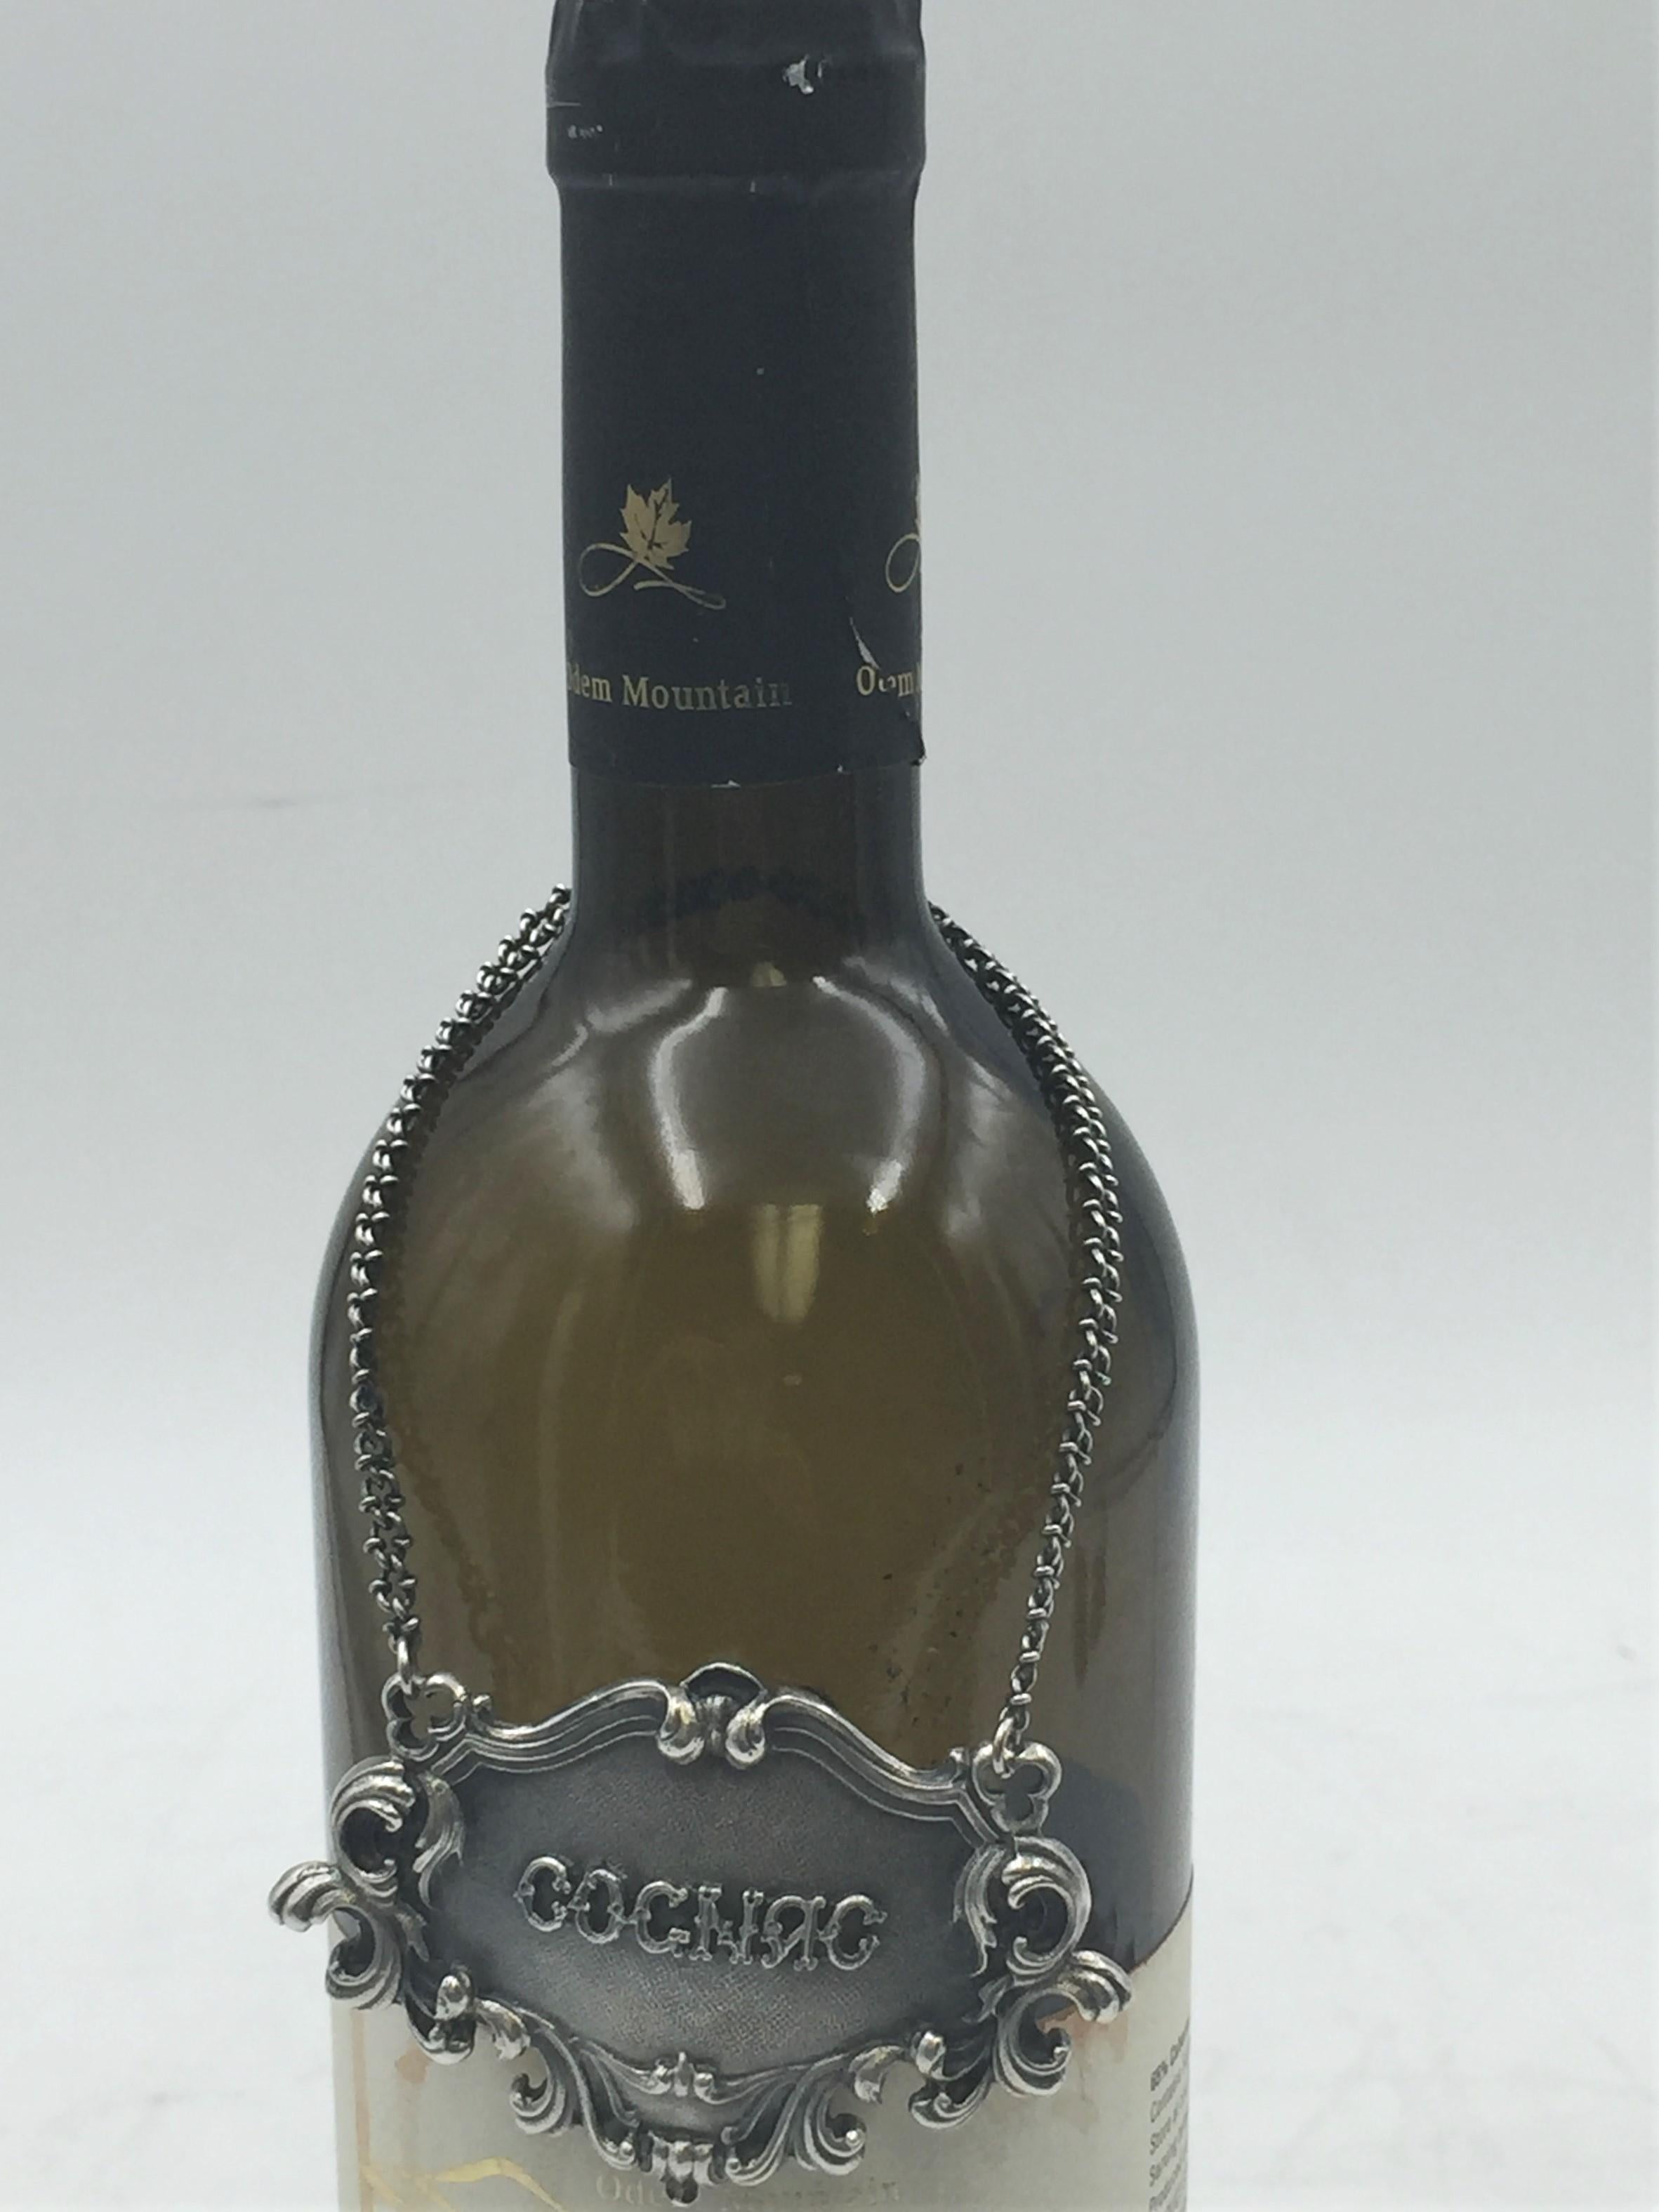 Rare Buccellati sterling silver claret bar jug label. COGNAC embossed on the front in the center.

Marks on the back: Gianmaria Buccellati (signature and Italian maker's mark), ITALY, 925 (encircled silver purity mark).

It measures 3in x 2in.